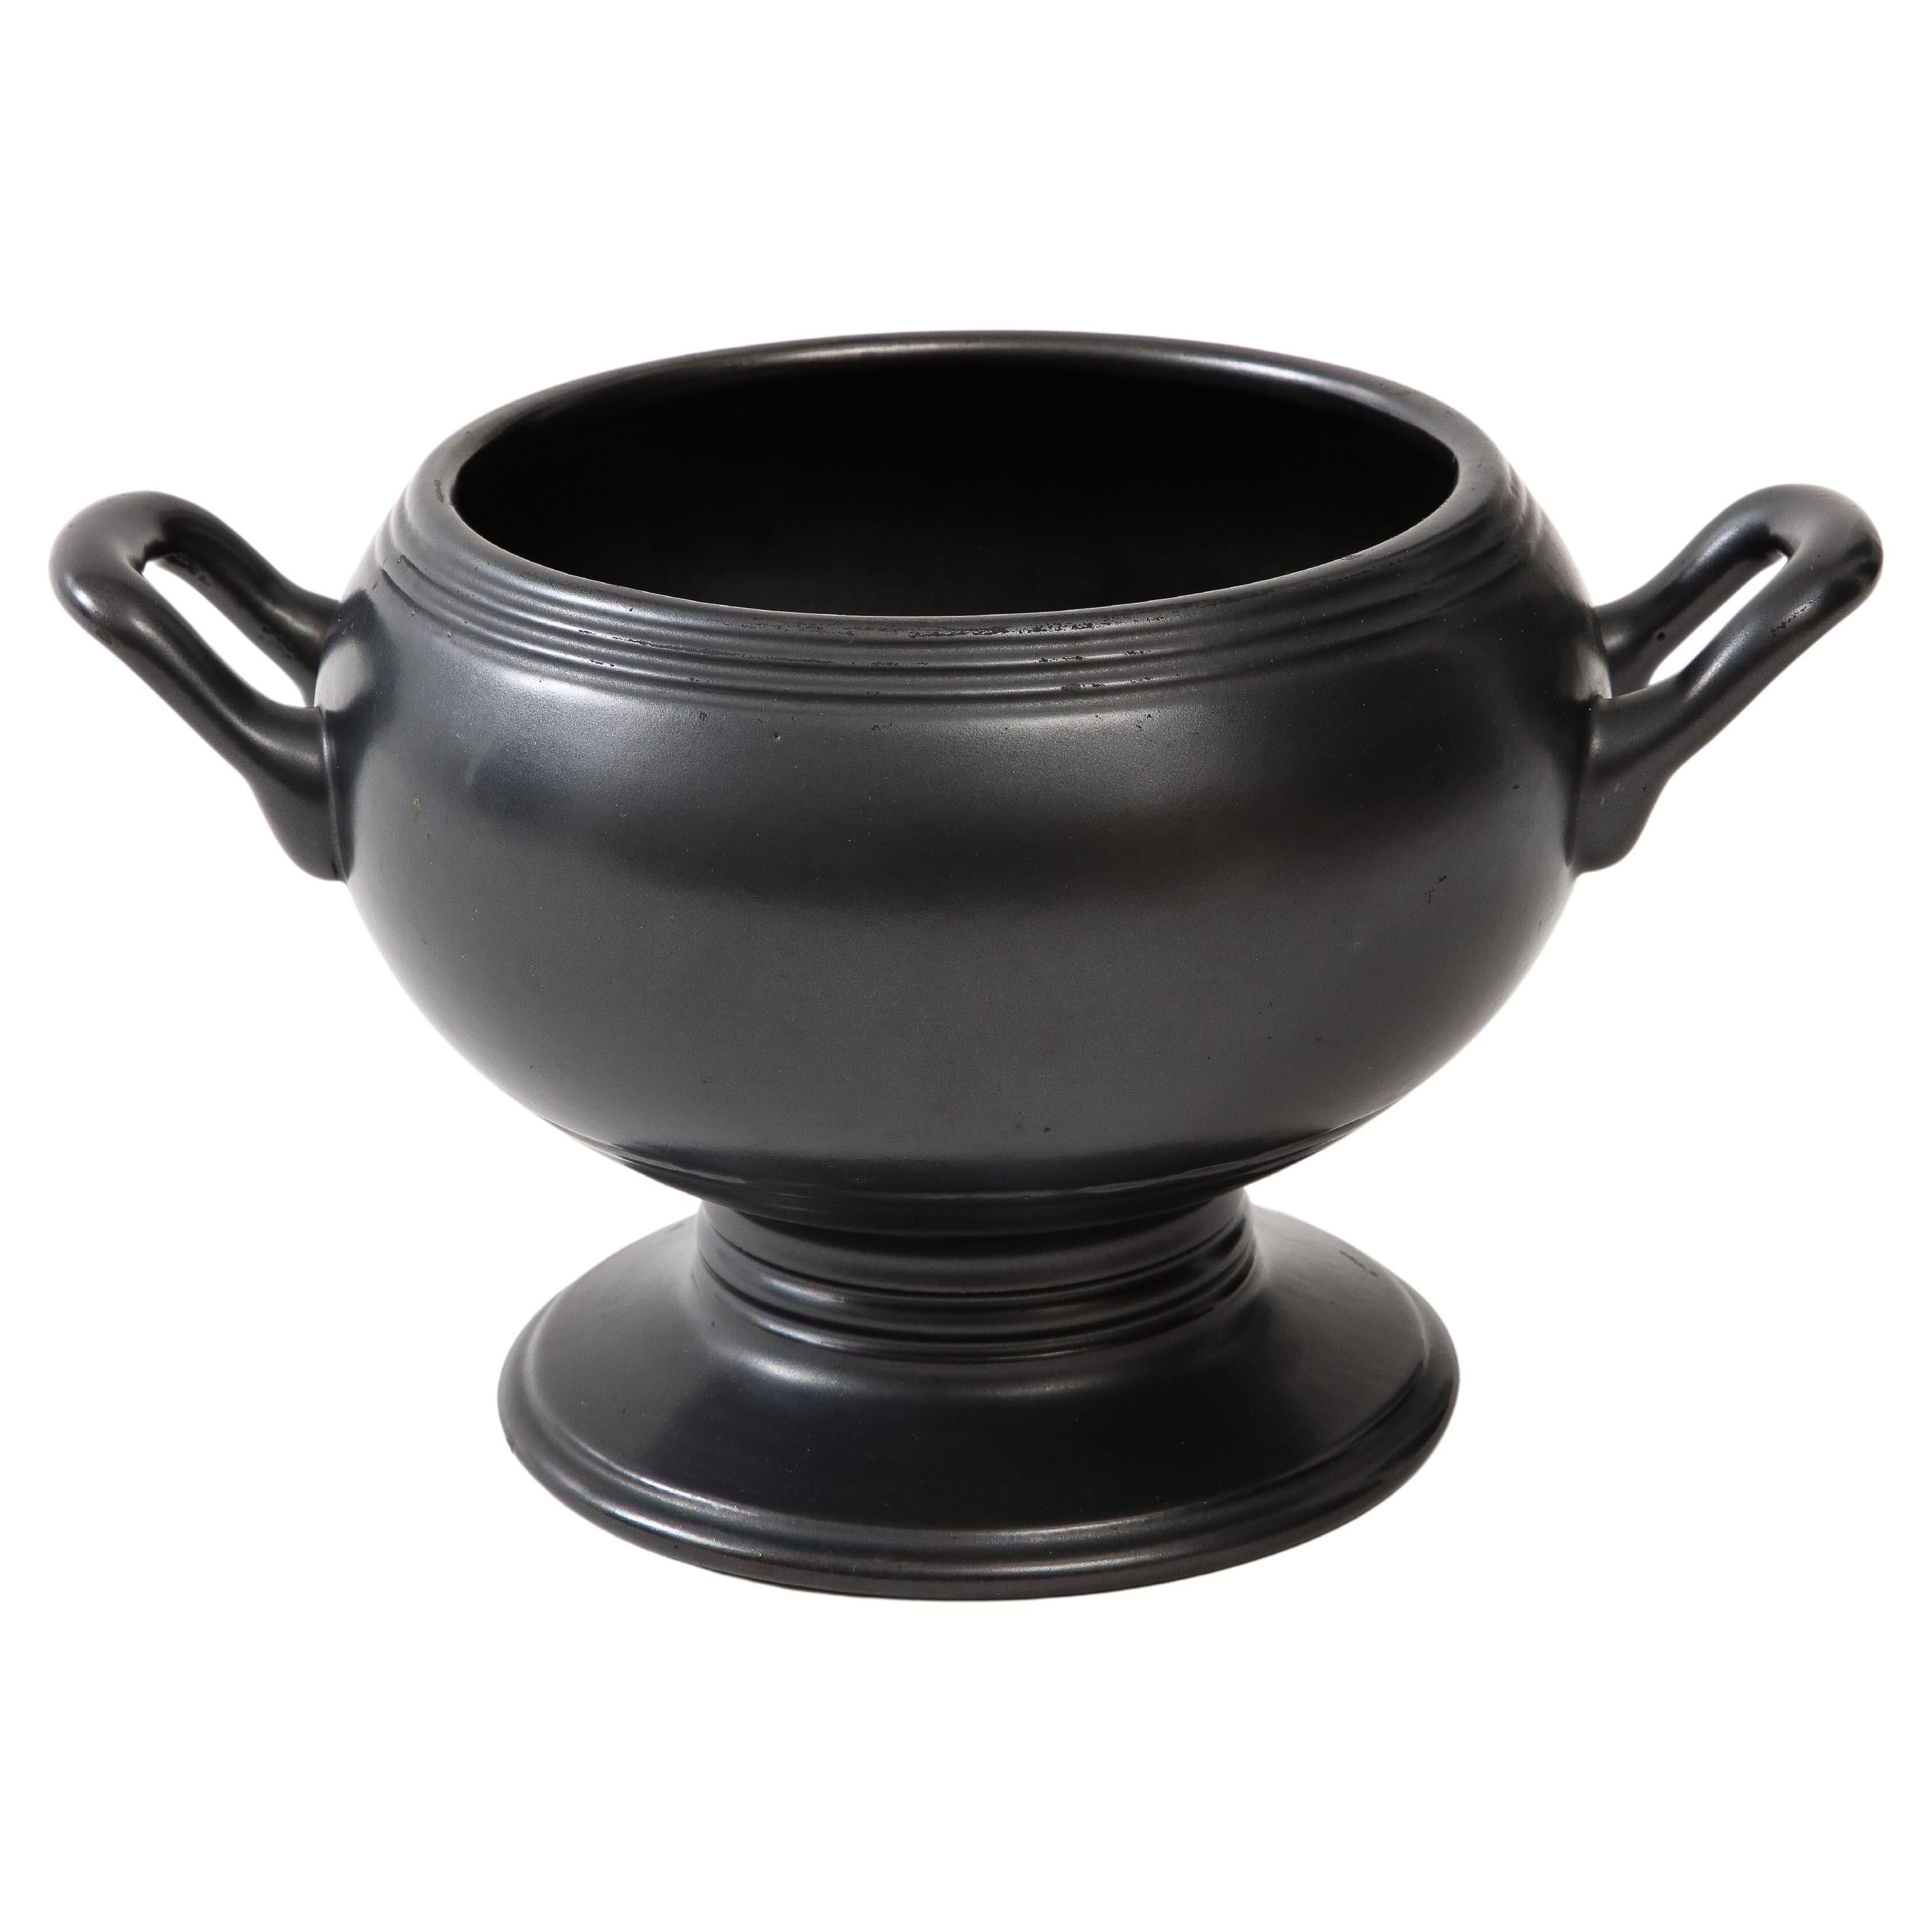 Large Classical Black Vase with Handles, France, c. 1960